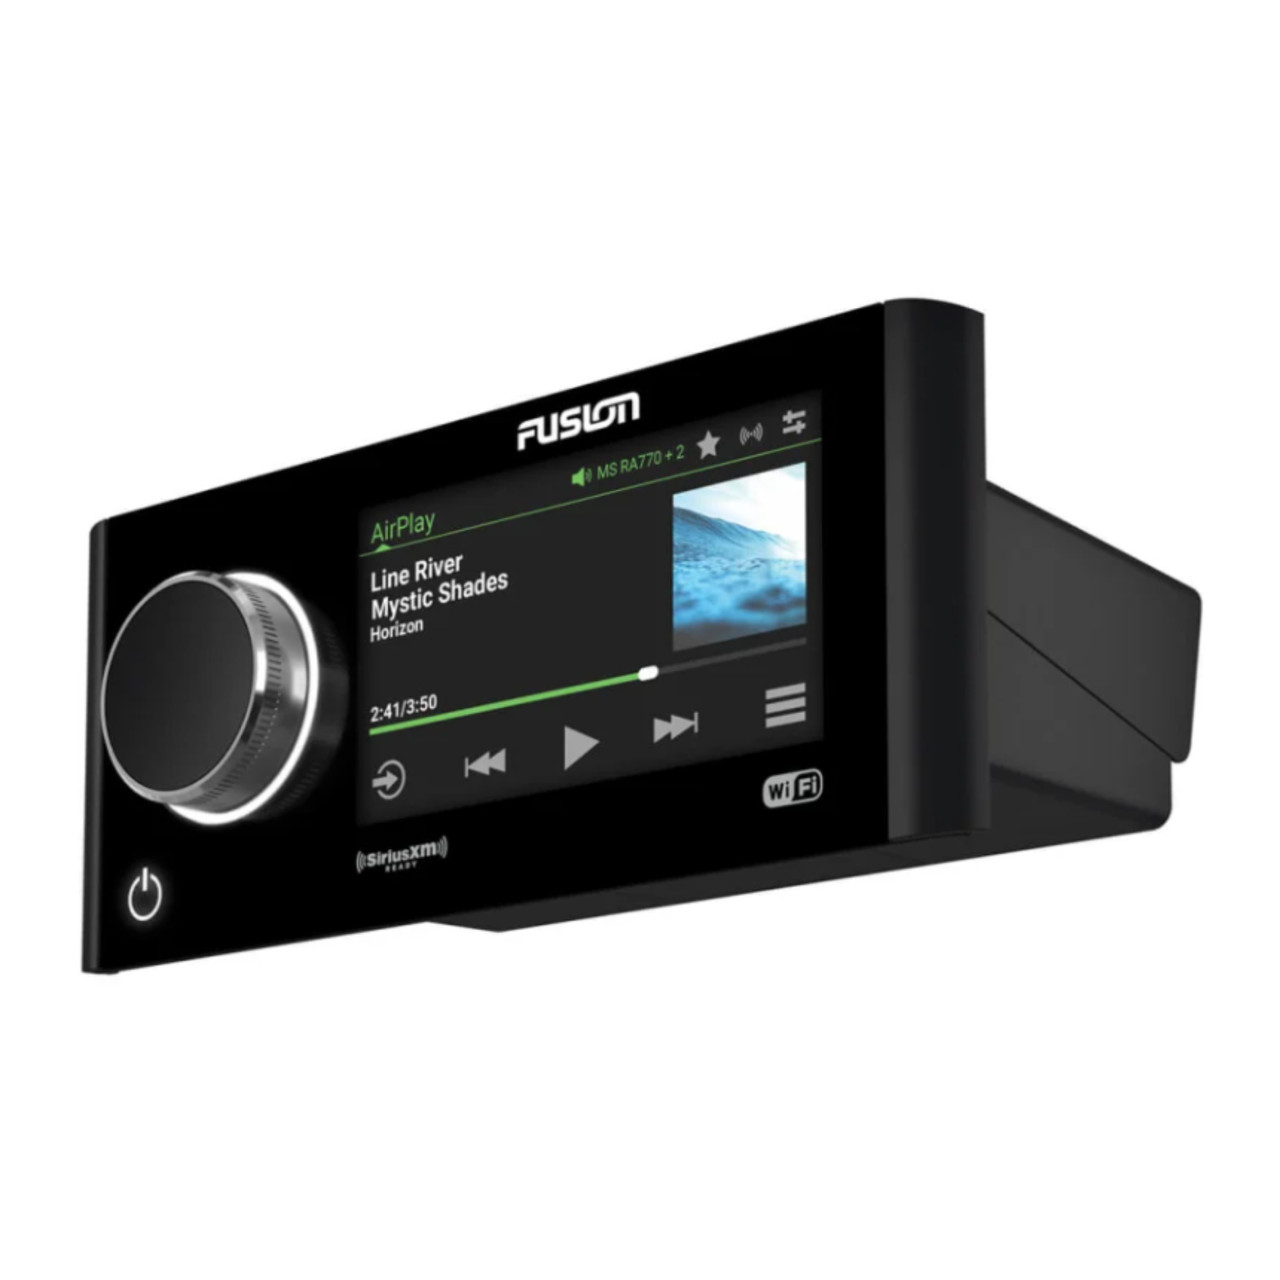 Garmin New OEM Fusion® Apollo™ MS-RA770 Marine Stereo With Built-in Wi-Fi®, 010-01905-00